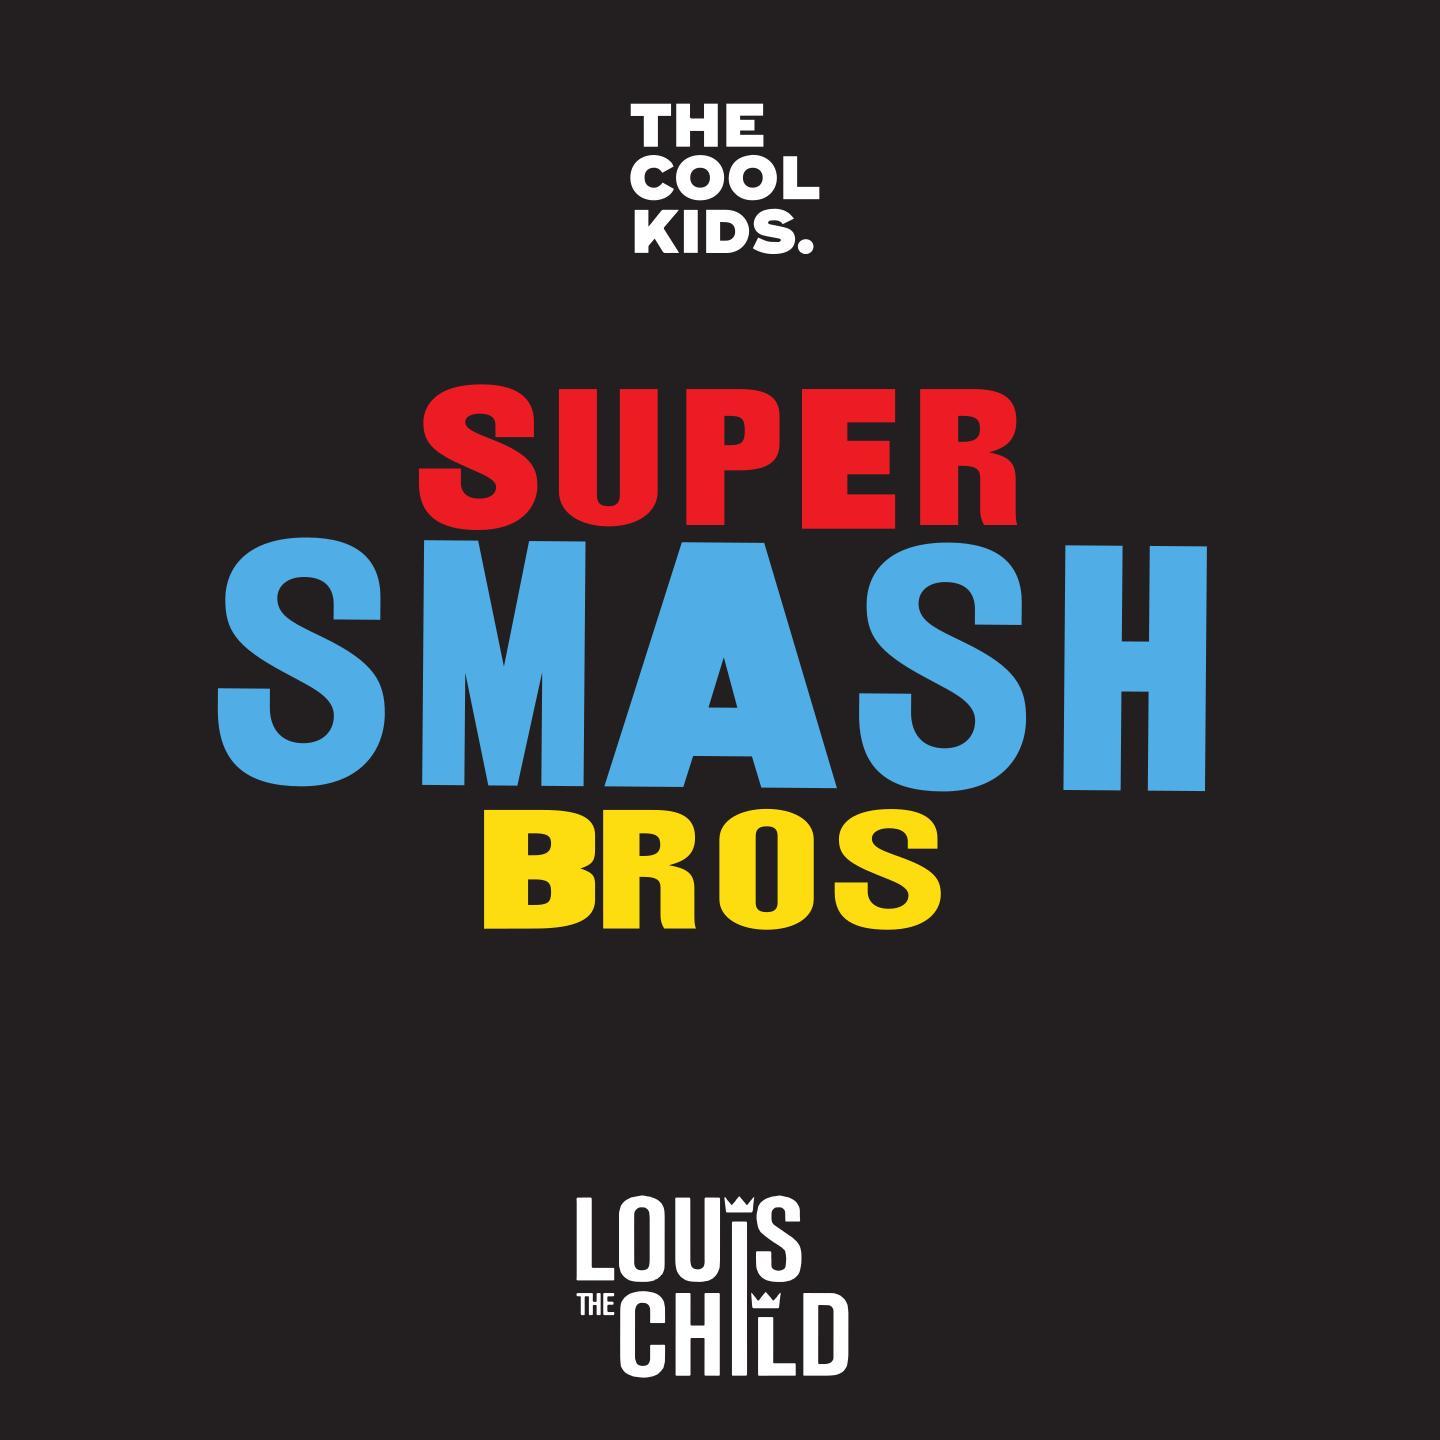 The Cool Kids Drop Another Collaboration With Louis The Child, “Super Smash Bros”